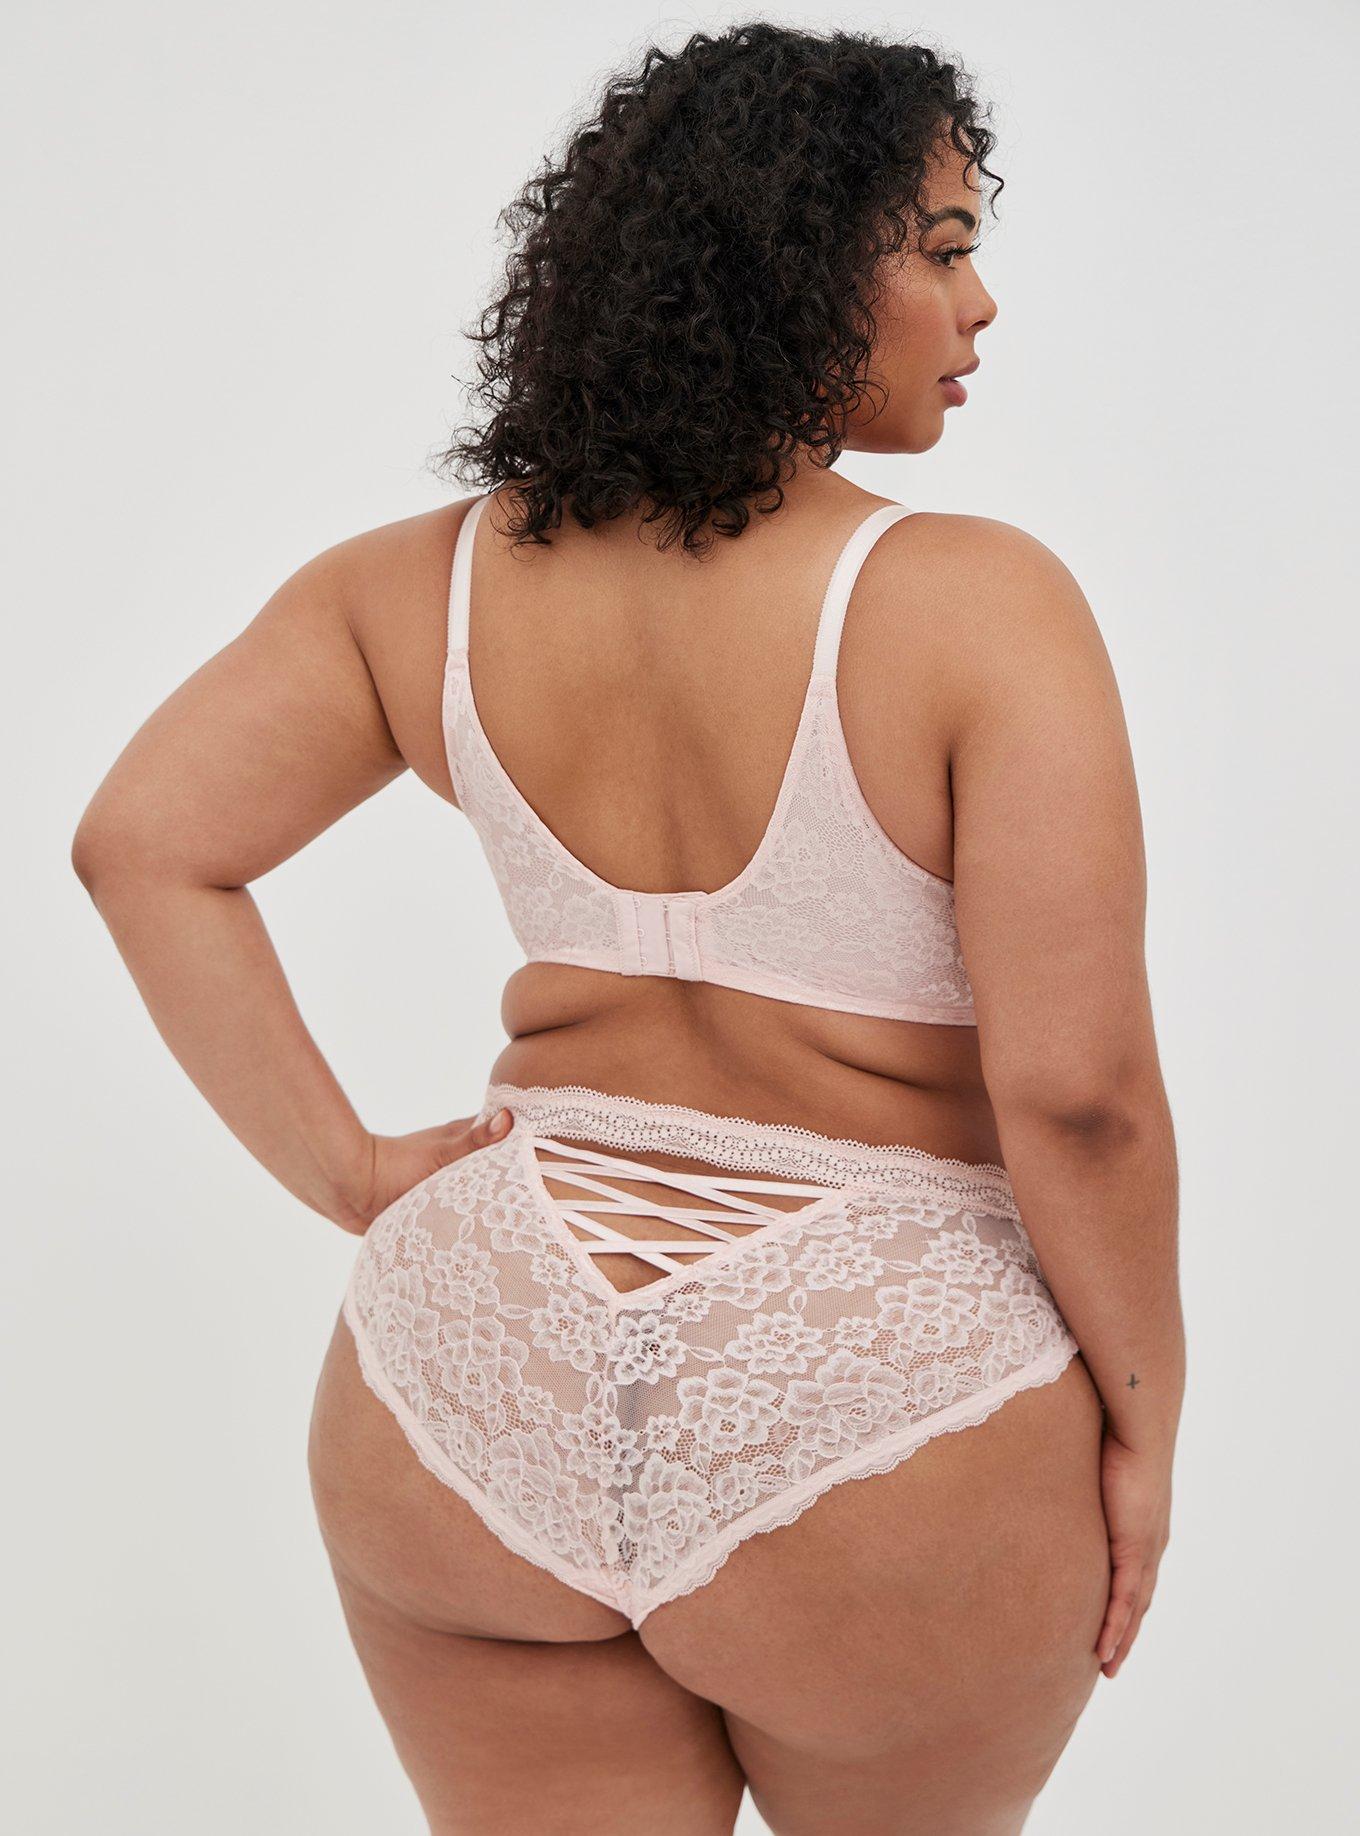 Plus Size - Lace Mid-Rise Cheeky Panty With Lattice Back - Torrid